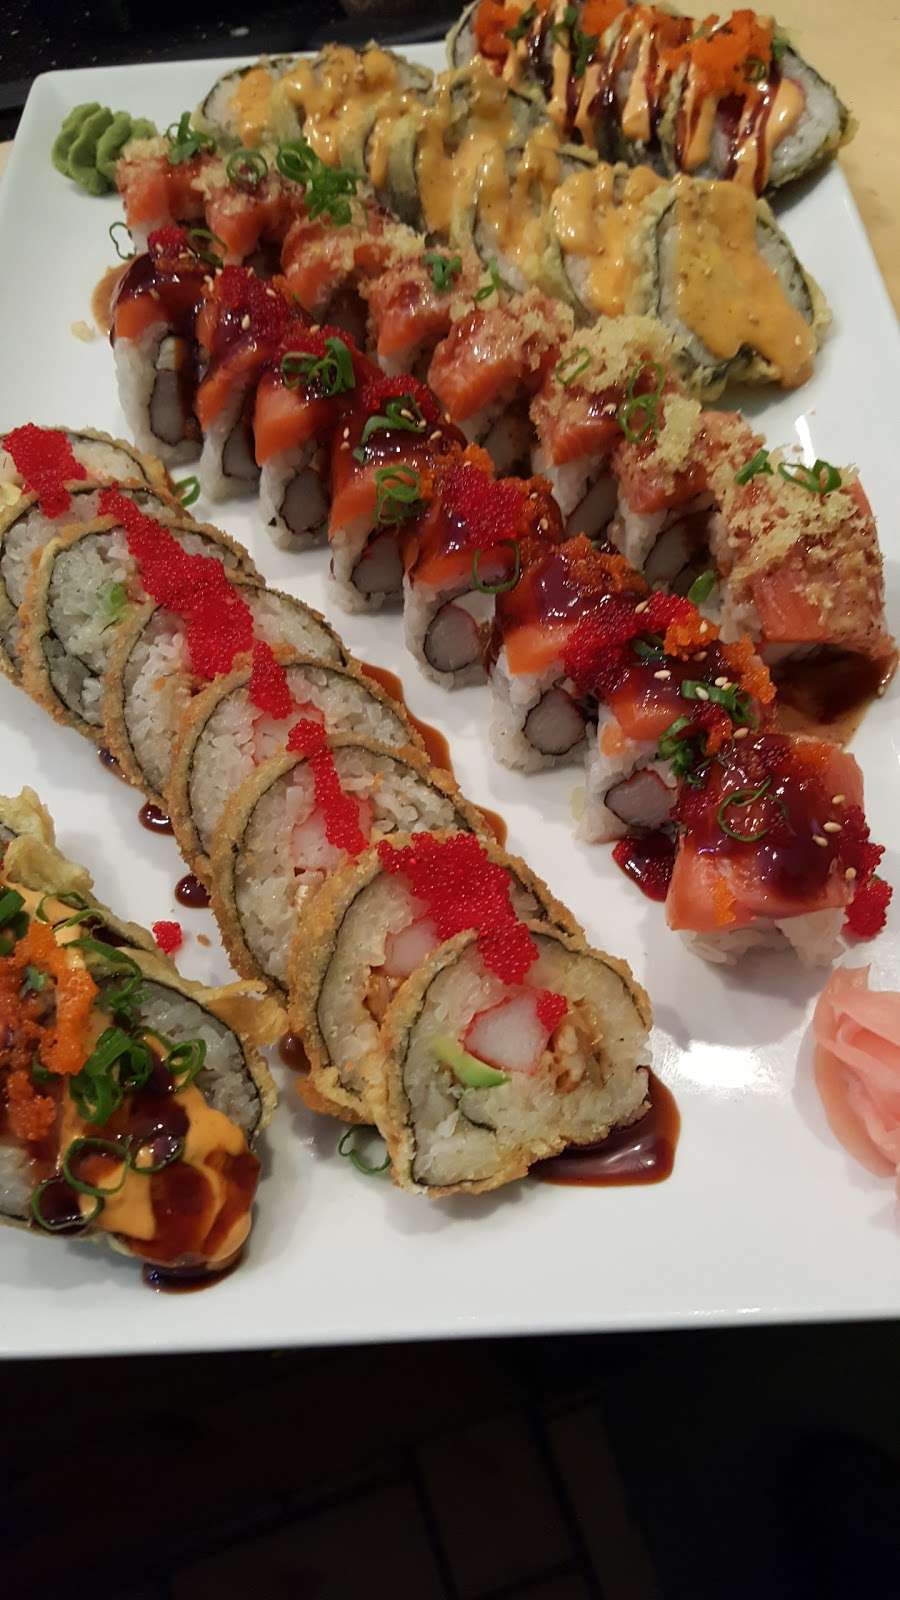 Sushi Queen Sushi and Grill | 85 Concord Commons Pl SW, Concord, NC 28027, USA | Phone: (704) 721-2222